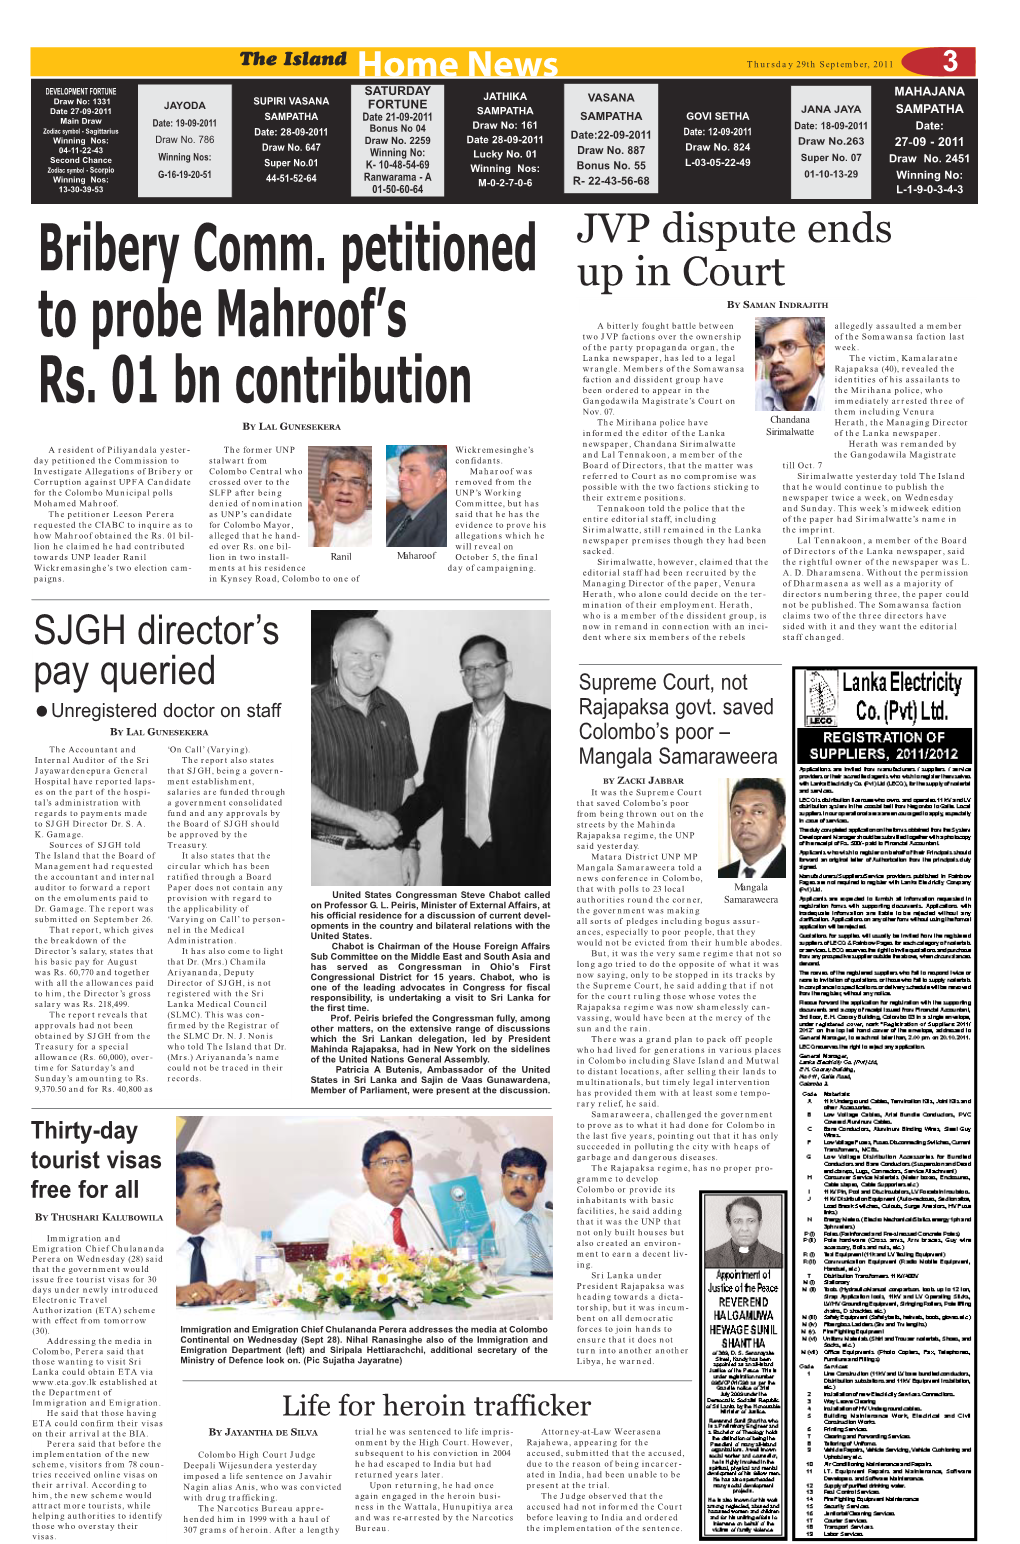 Bribery Comm. Petitioned to Probe Mahroof's Rs. 01 Bn Contribution